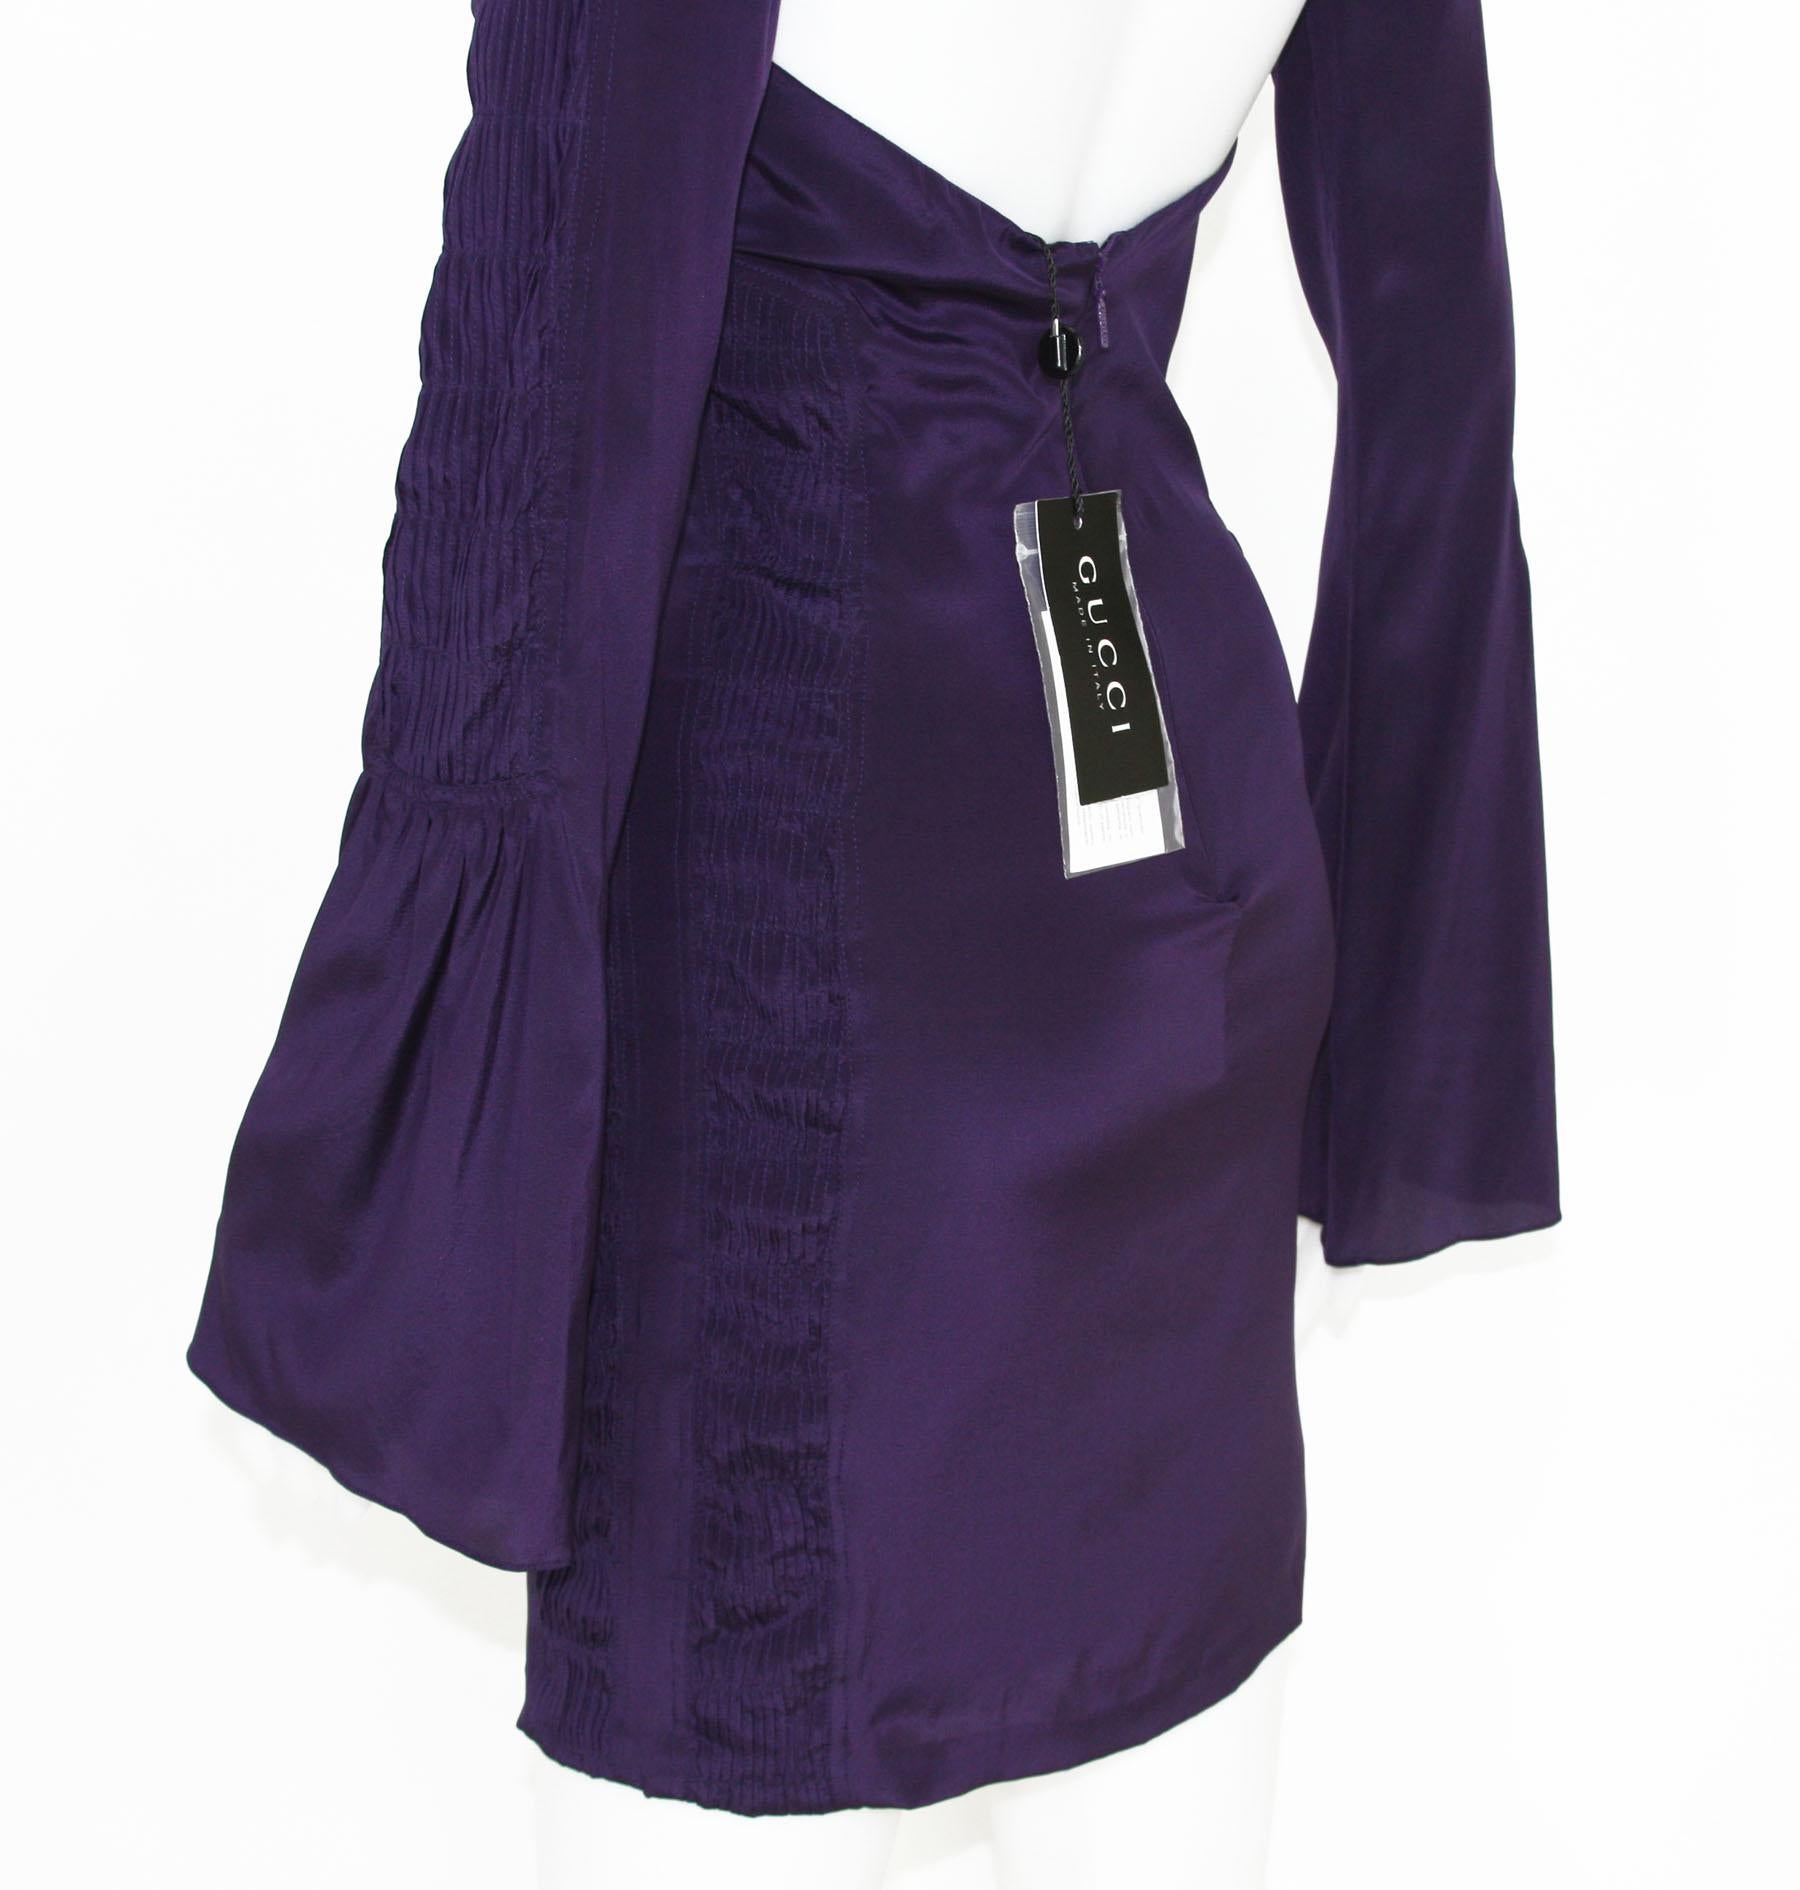 Women's New Tom Ford for Gucci S/S 2004 Deep Purple Silk Plunging Backless Dress 38 & 44 For Sale